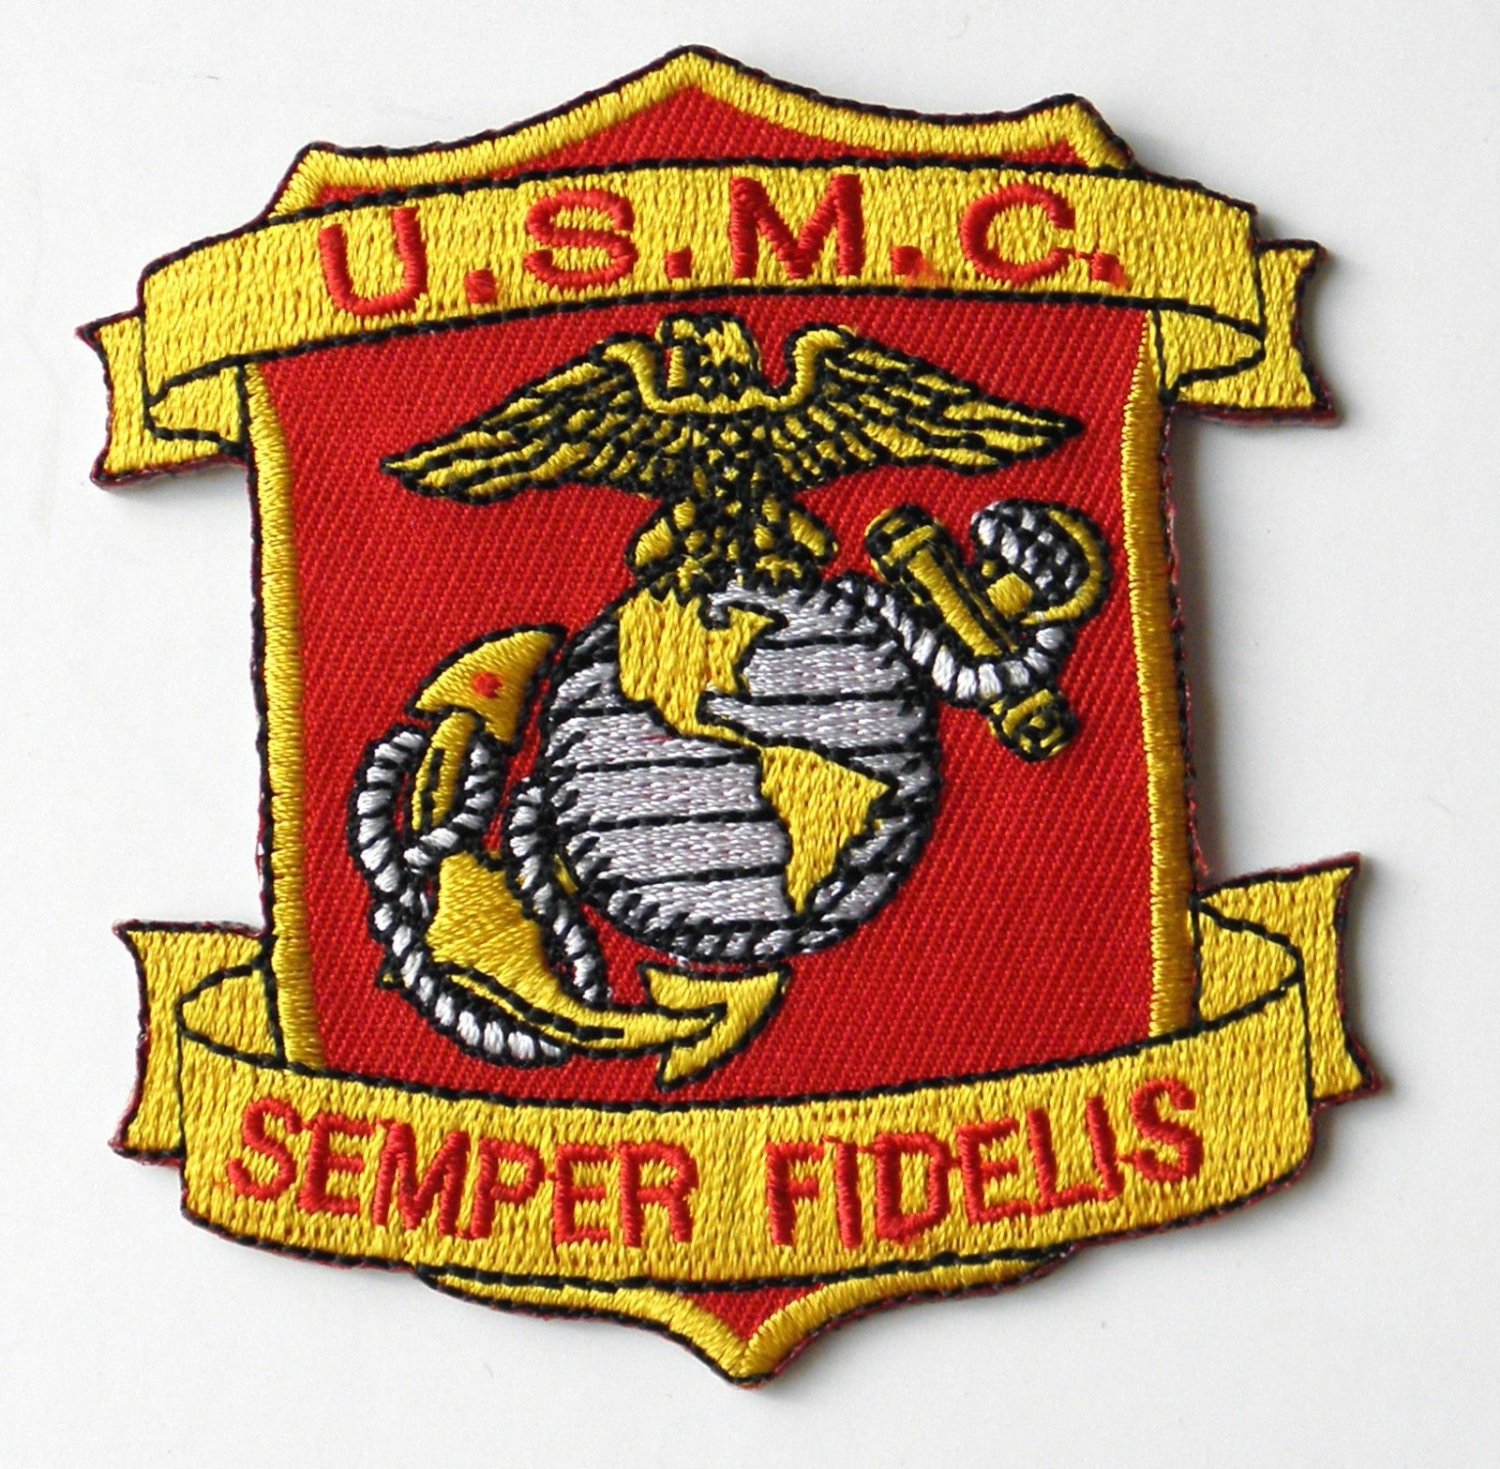 USMC US Marine Corps Marines Semper Fi Fidelis Embroidered Patch 3 Inches.